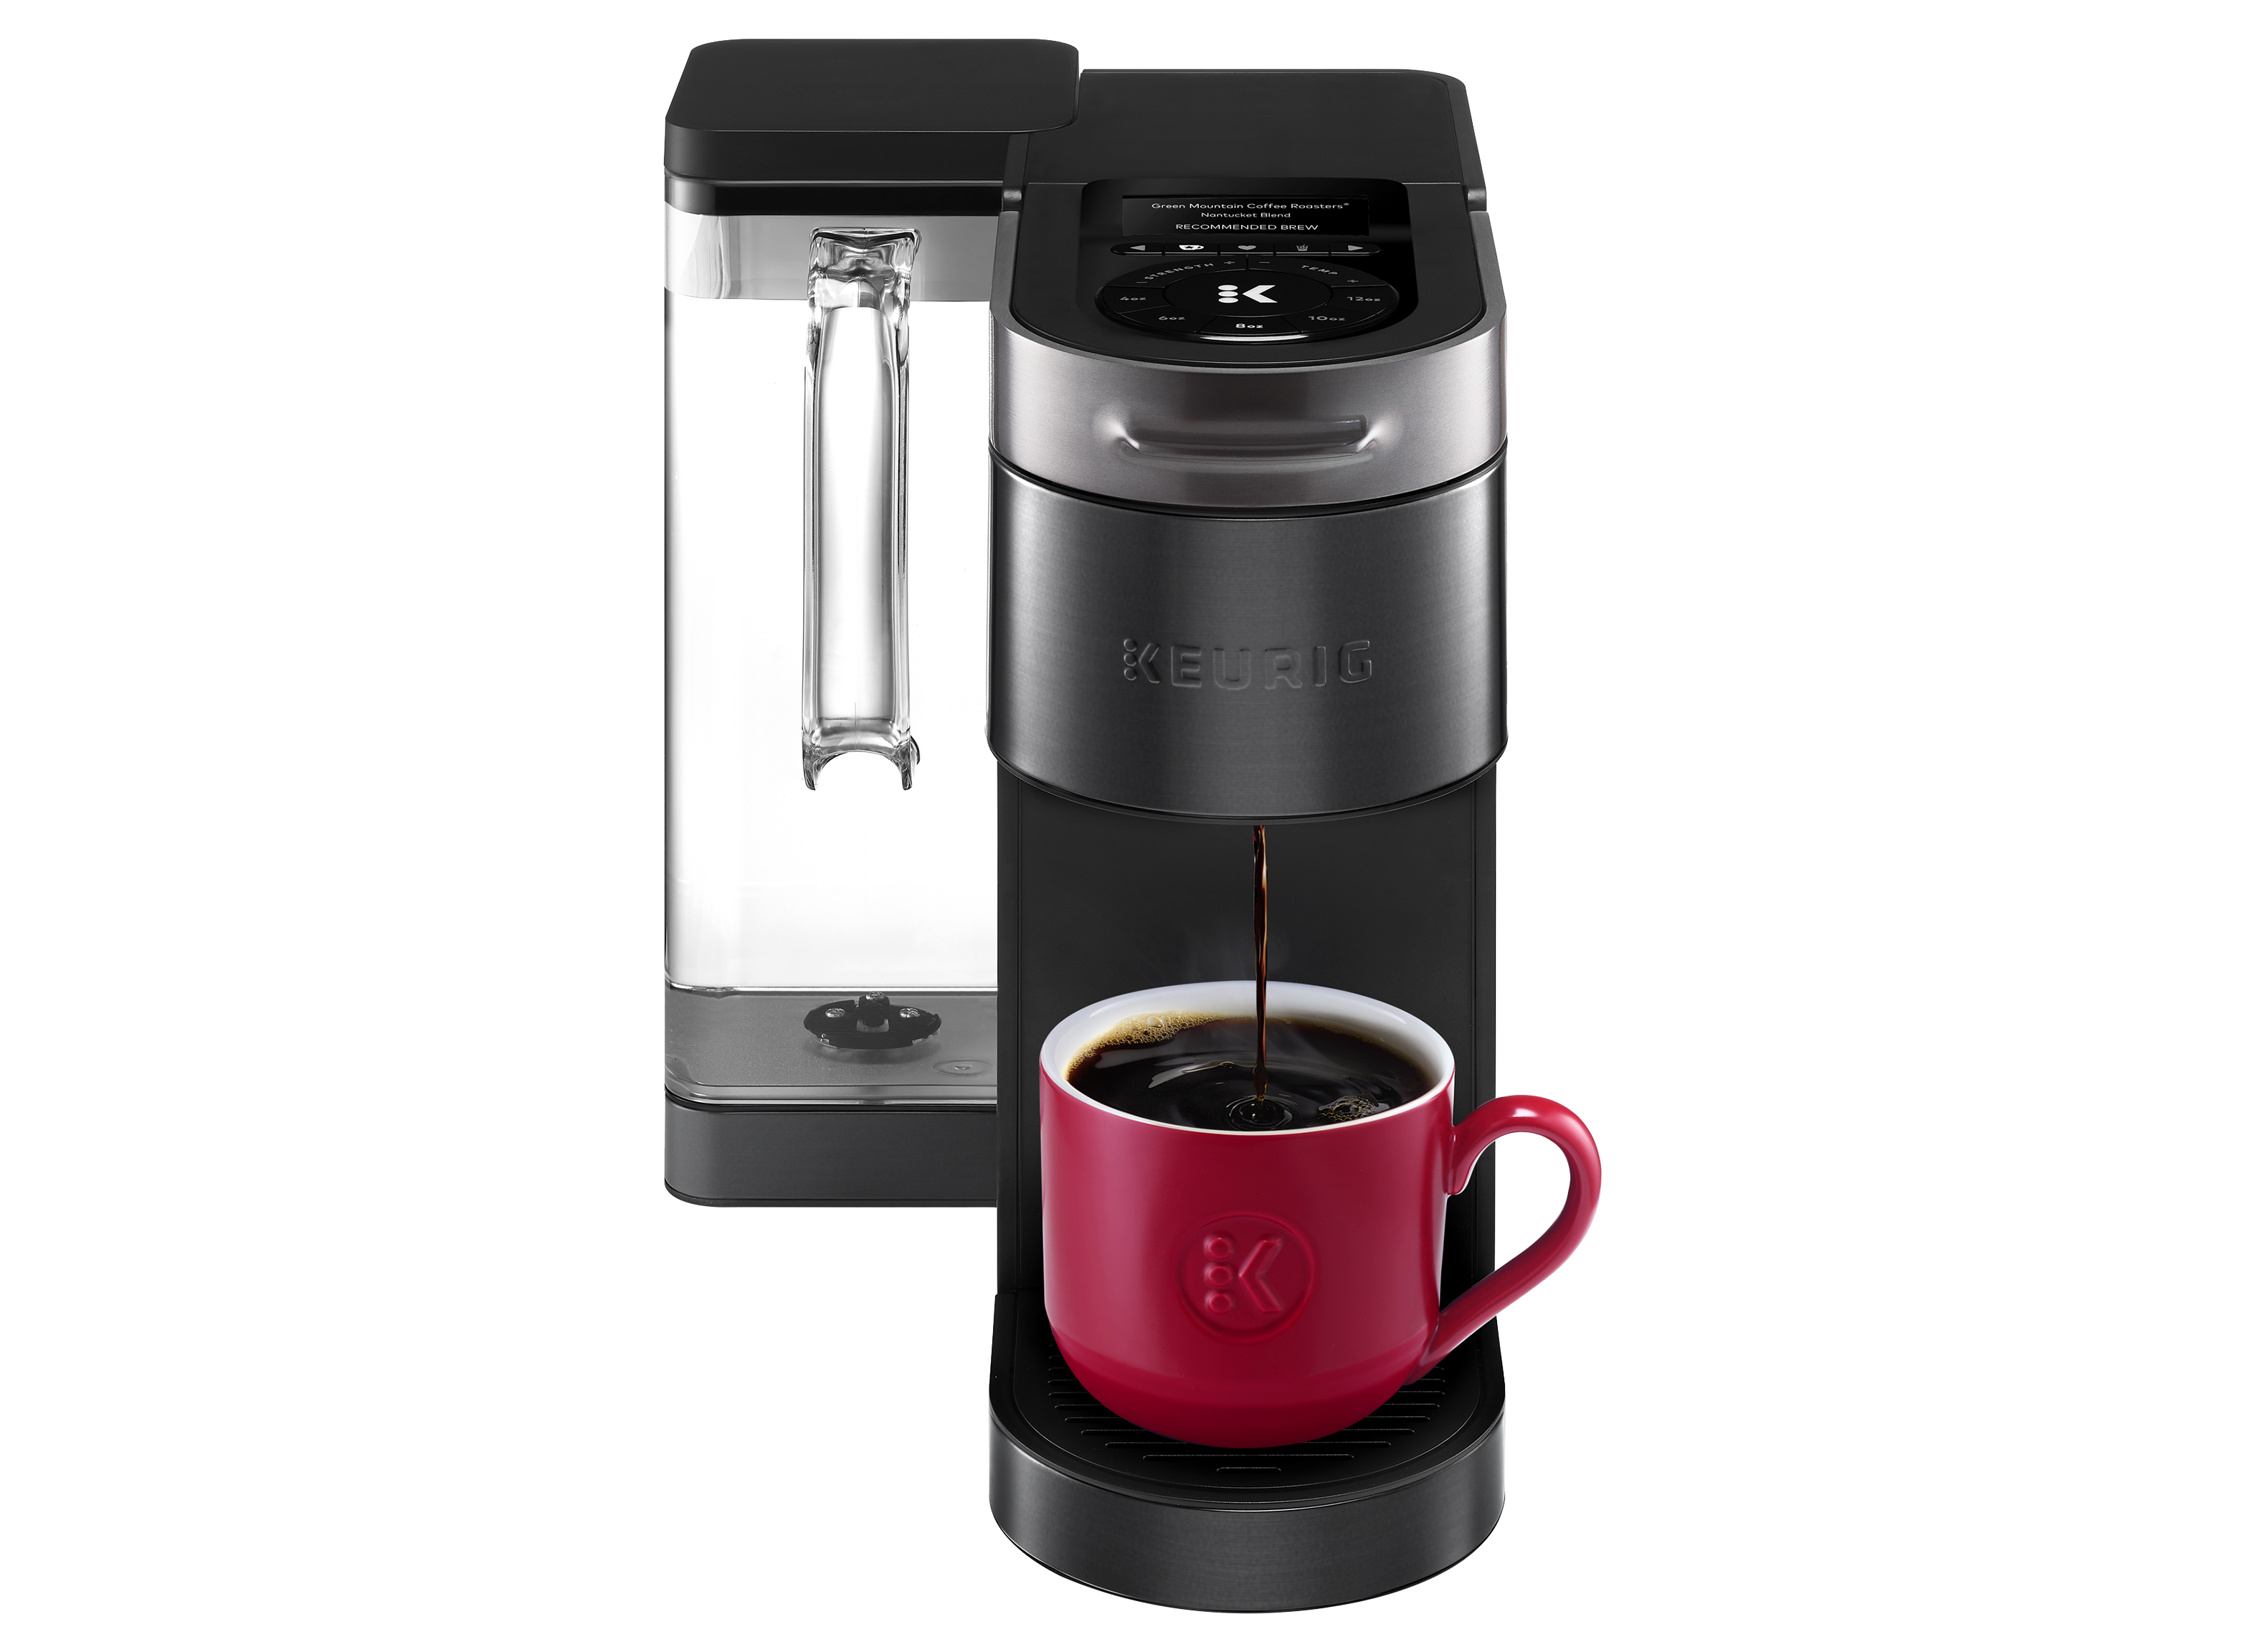 https://crdms.images.consumerreports.org/prod/products/cr/models/404601-pod-coffee-makers-keurig-k-supreme-plus-smart-10022915.png